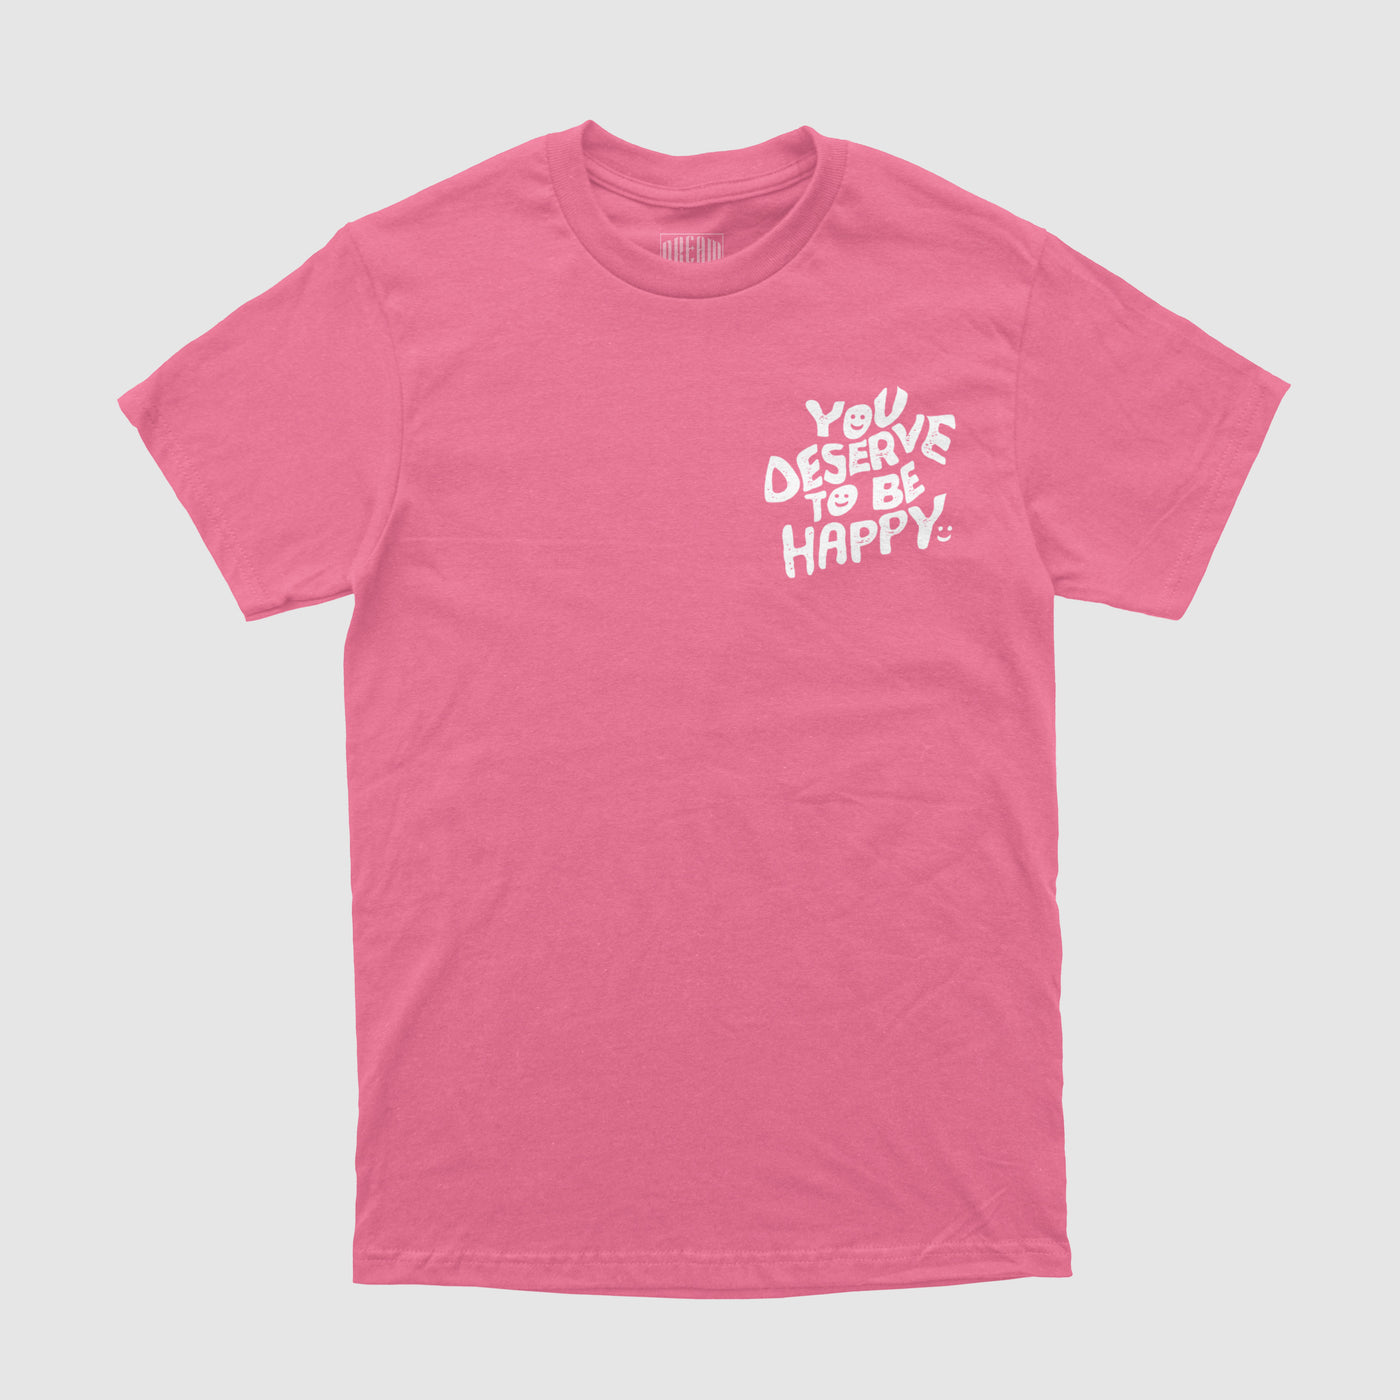 You Deserve To Be Happy Tee
10% Donated to our Non-Profit Mental Health Awareness Partners
4.2 oz./yd² (US) 7 oz./L yd (CA), 100% airlume combed and ringspun cotton, 32 singles
Unisex sizing
CDREAM Clothing 